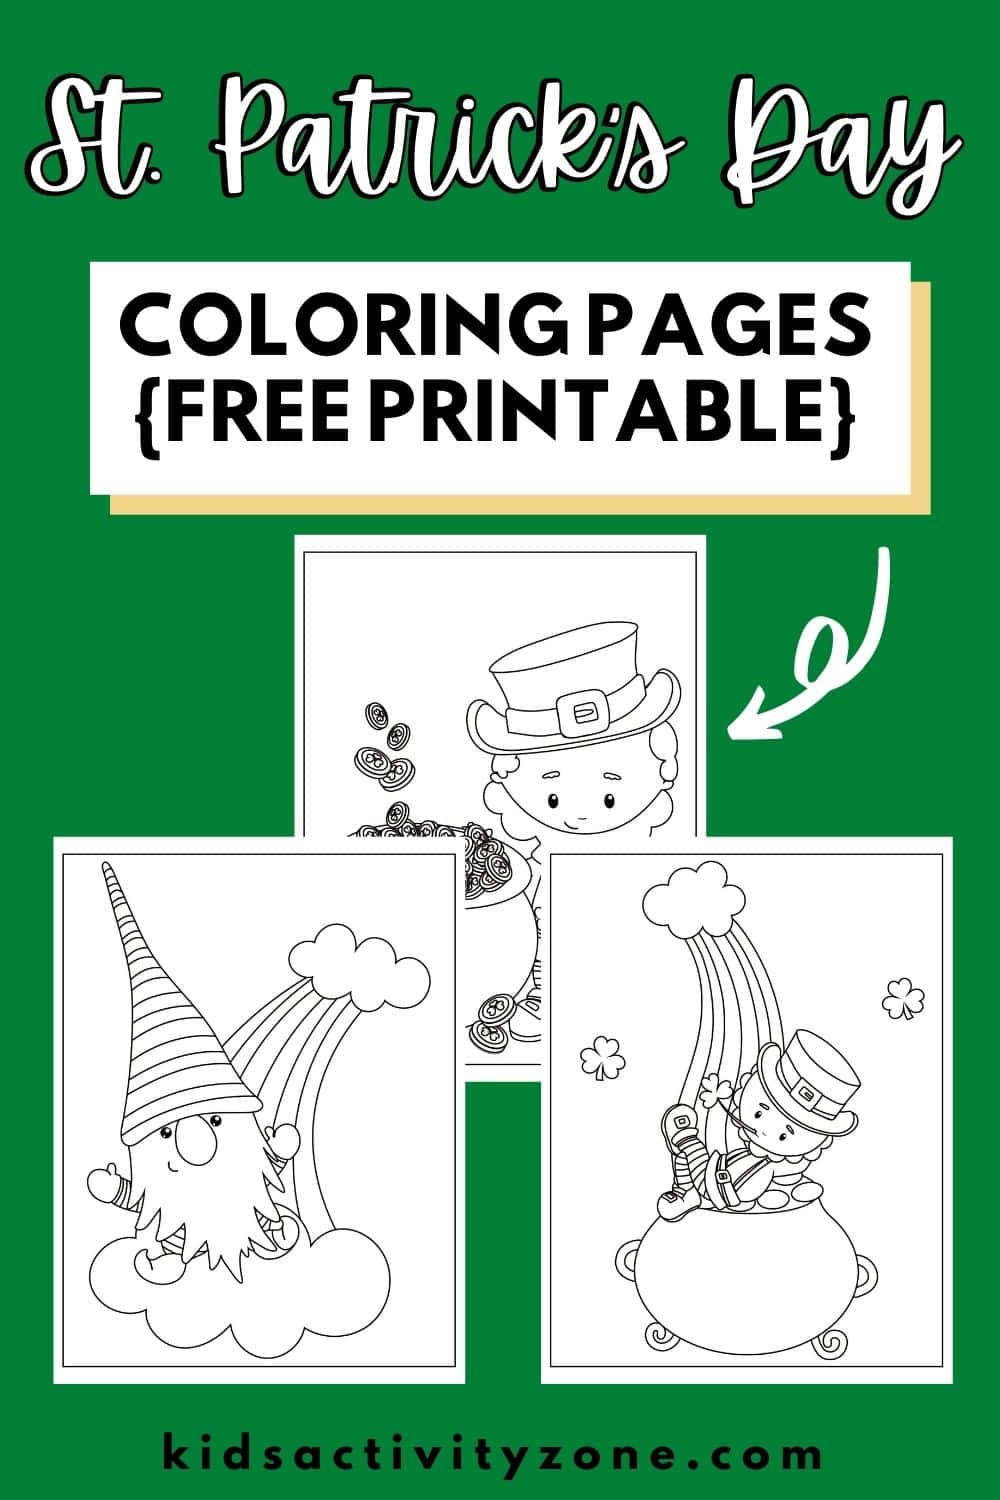 St. Patrick's Day Coloring Pages as a free download. Free coloring pages for your St. Patrick's Day parties with cute gnomes, leprechauns and more!